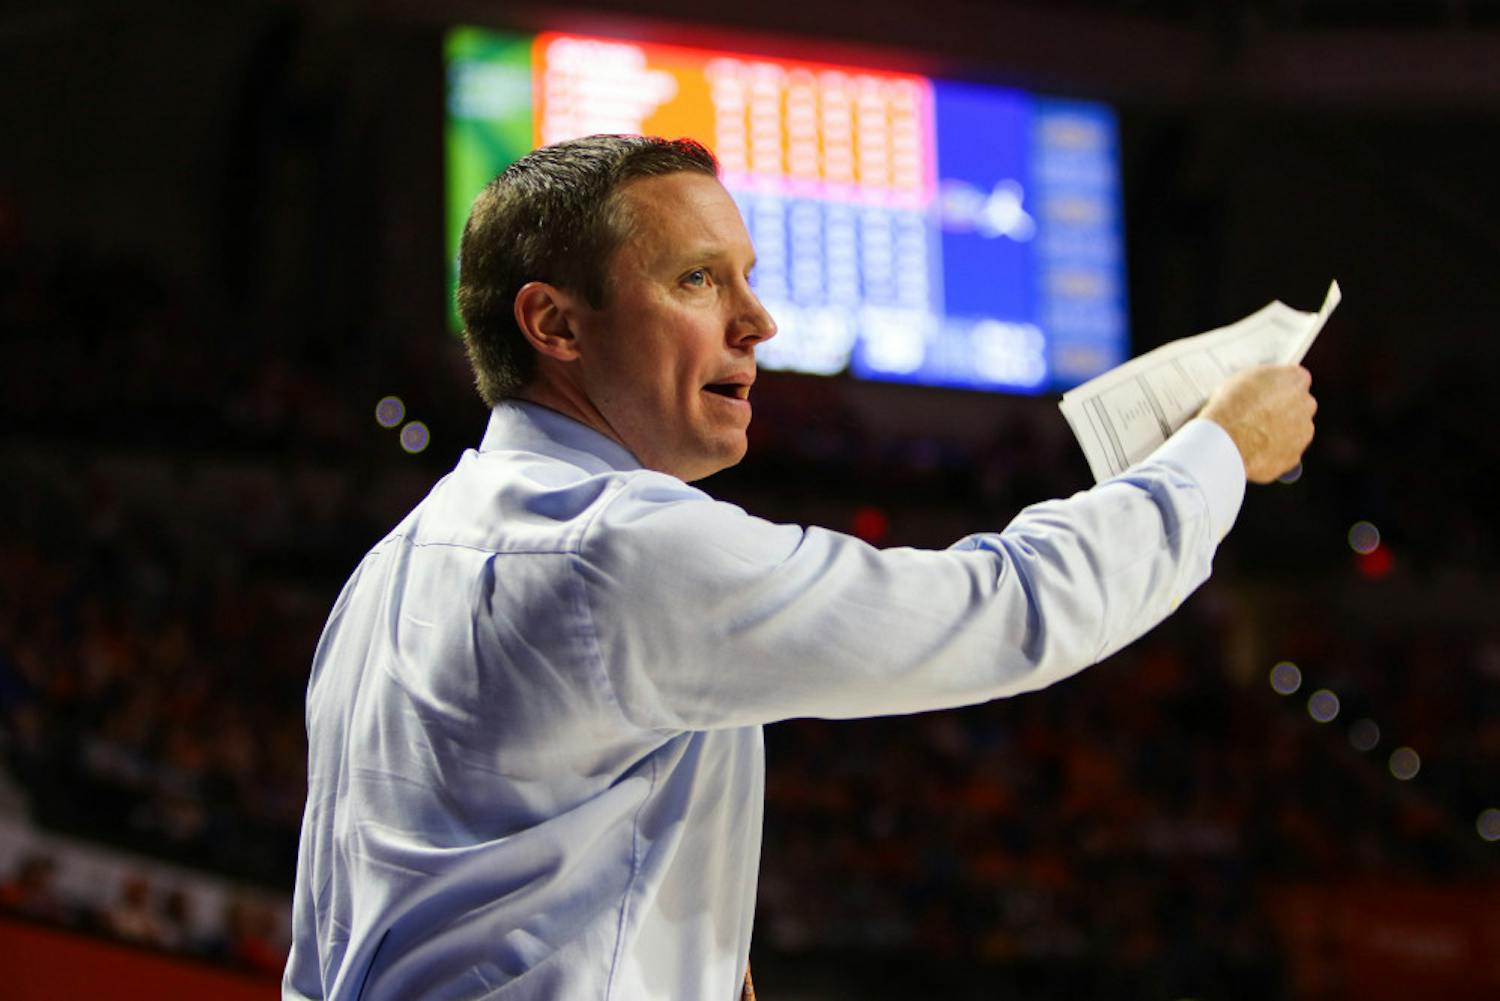 The Gators turned the ball over 17 times during their 76-62 loss to Auburn on Tuesday. "Could talk about it until we were blue in the face...Auburn has elite team speed. Active hands," coach Mike White said. 